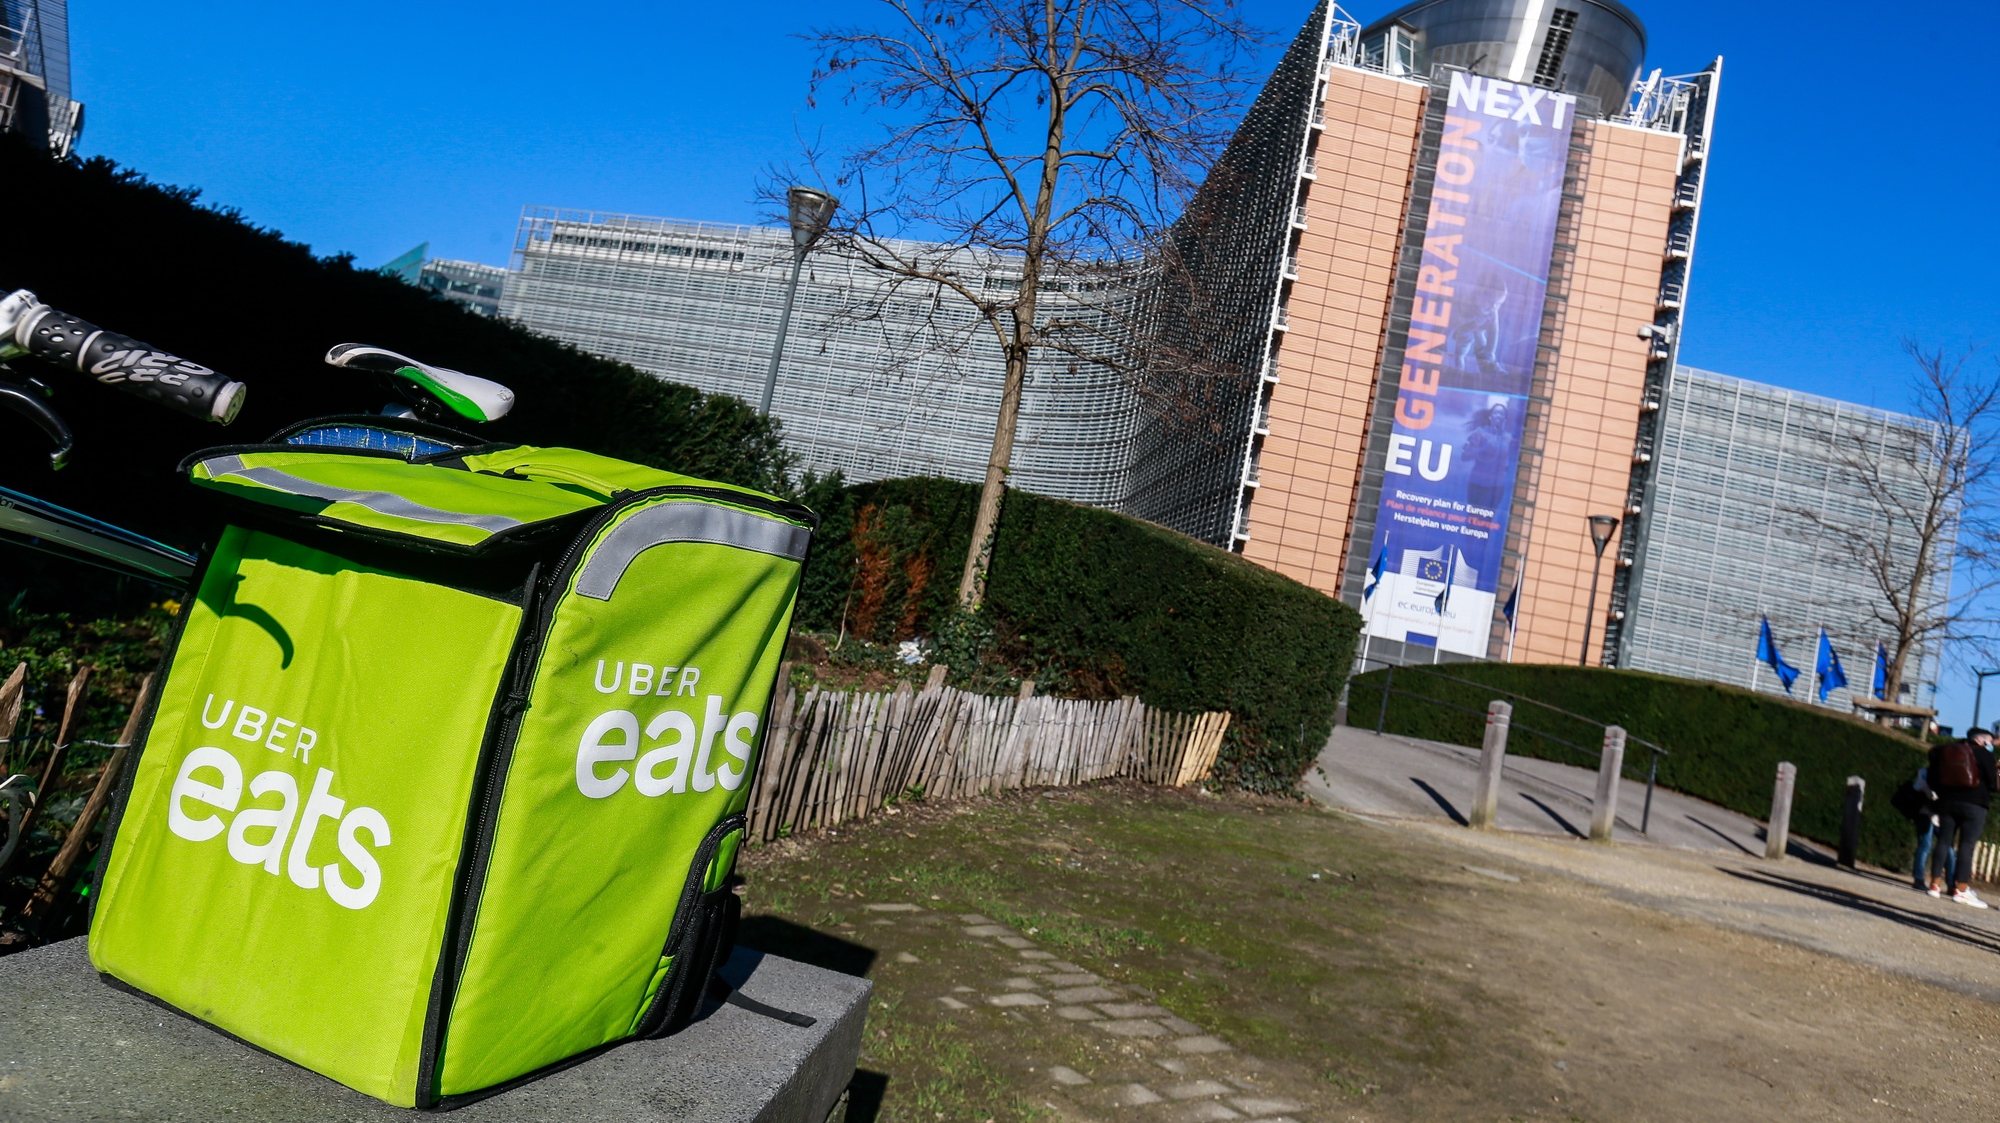 epa09033370 An Uber eats delivery box during the gathering of different trade union organizations for the International Platform Workers Action Day in front of the European Commission in Brussels, Belgium, 24 February 2021. The European Commission begins a consultation on 24 February in its initiative to help improve the working conditions of Platform workers. The trade unions and the Belgian courier collective call on the Commission to go in the direction of the demands and the interests of the workers, not of the platforms. The same type of action takes place in 15 different countries on the same day.  EPA/STEPHANIE LECOCQ